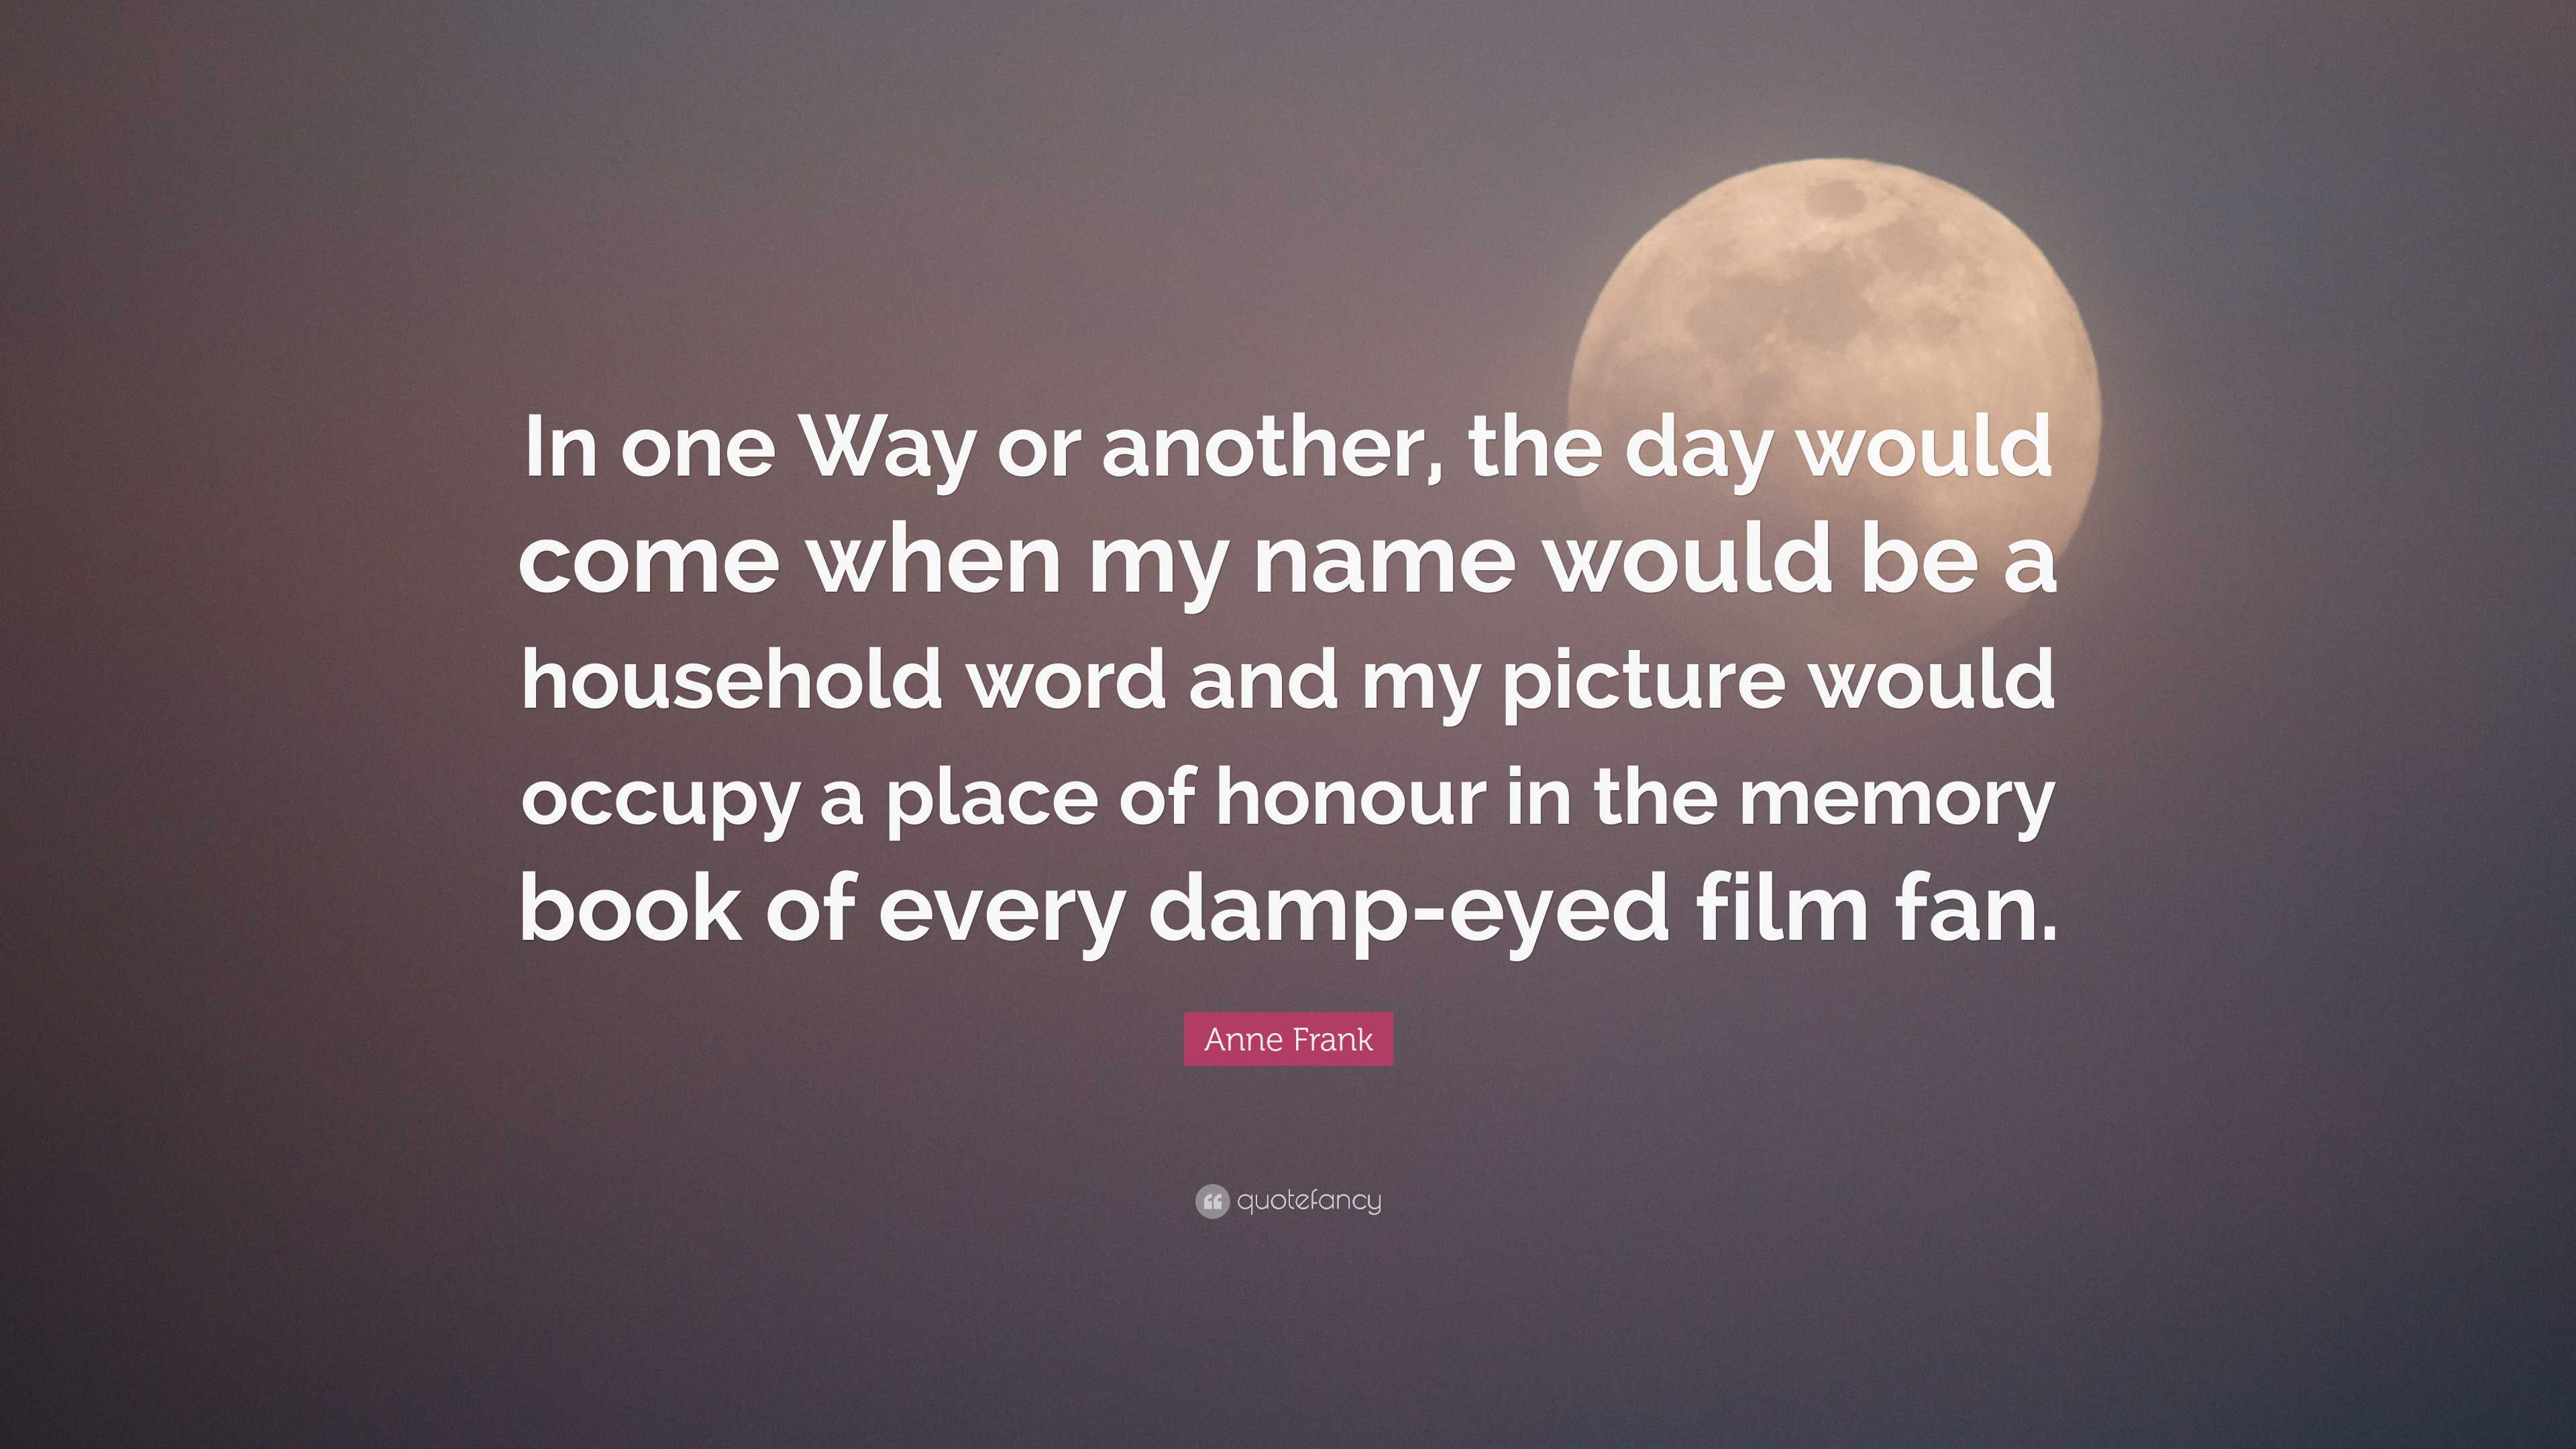 Anne Frank Quote: “In one Way or another, the day would come when my ...